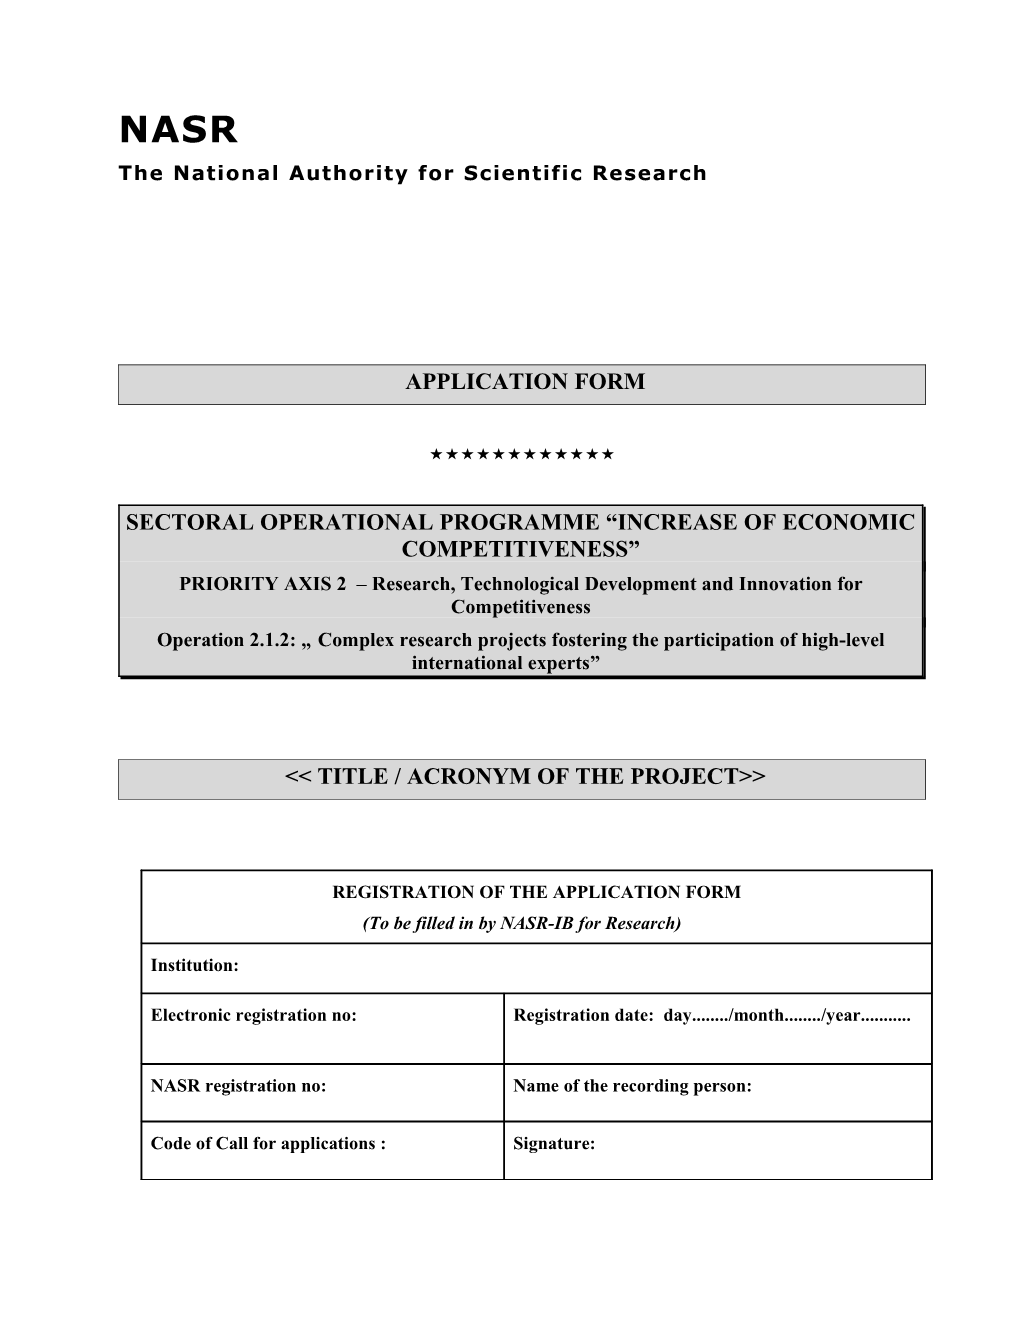 The National Authority for Scientific Research